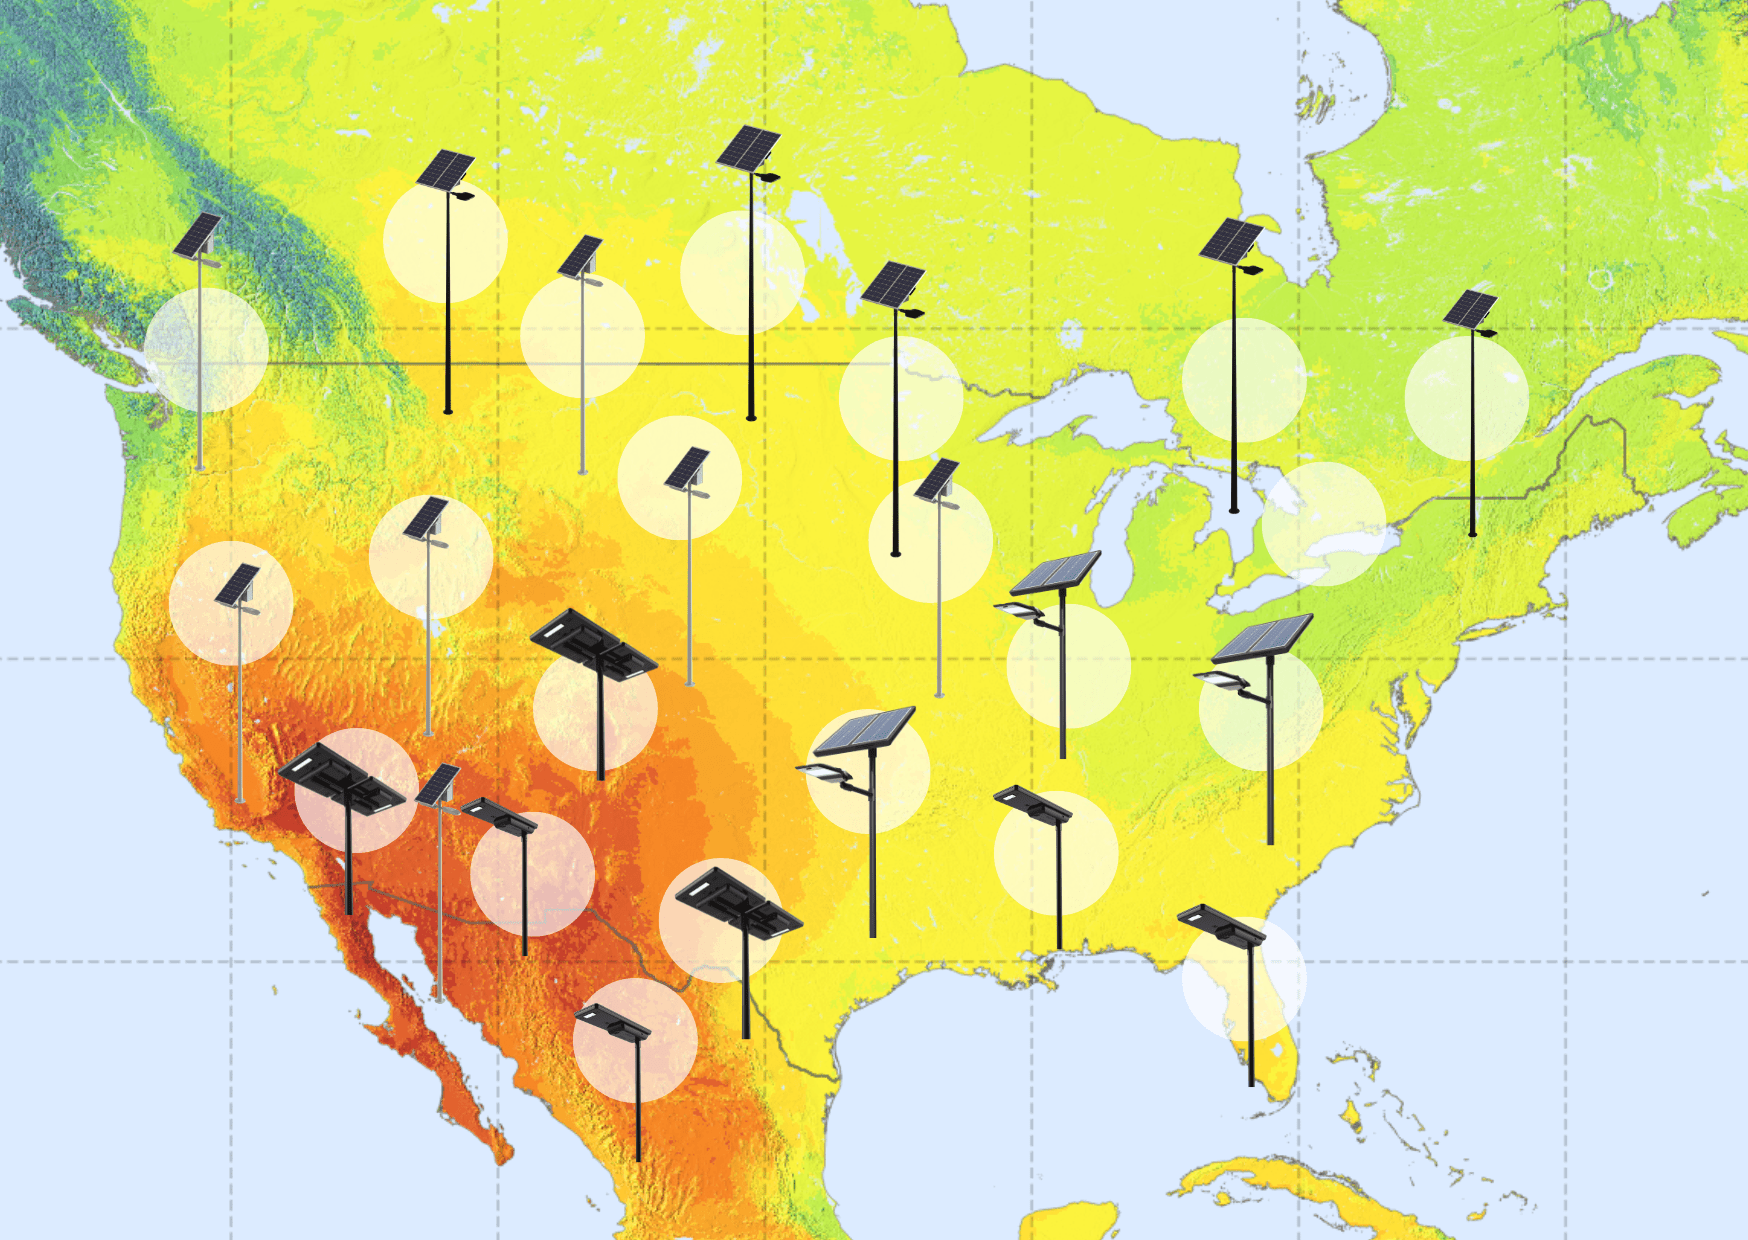 solar irradiation map of United States and Canada showing where various Sol systems are sustainable